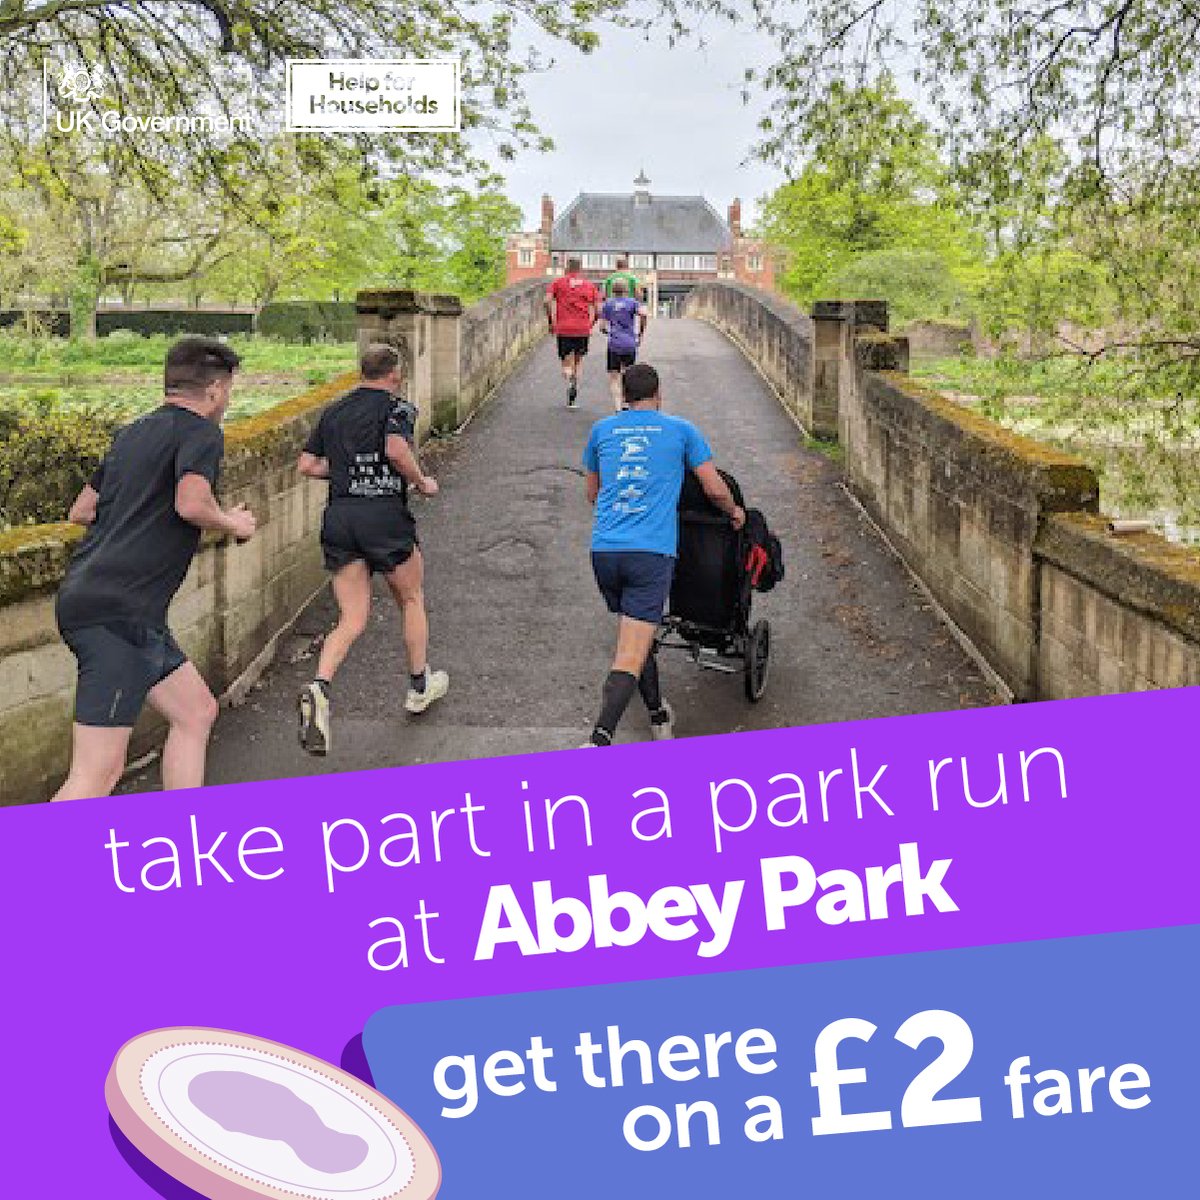 Hit the park this summer and take part in a park run 🏃🏽 A free, fun, and friendly weekly 5k community event. Walk, jog, run, volunteer or spectate – it's up to you! Abbey Park is Leicester’s premier park and lies approximately one mile north of the city centre.